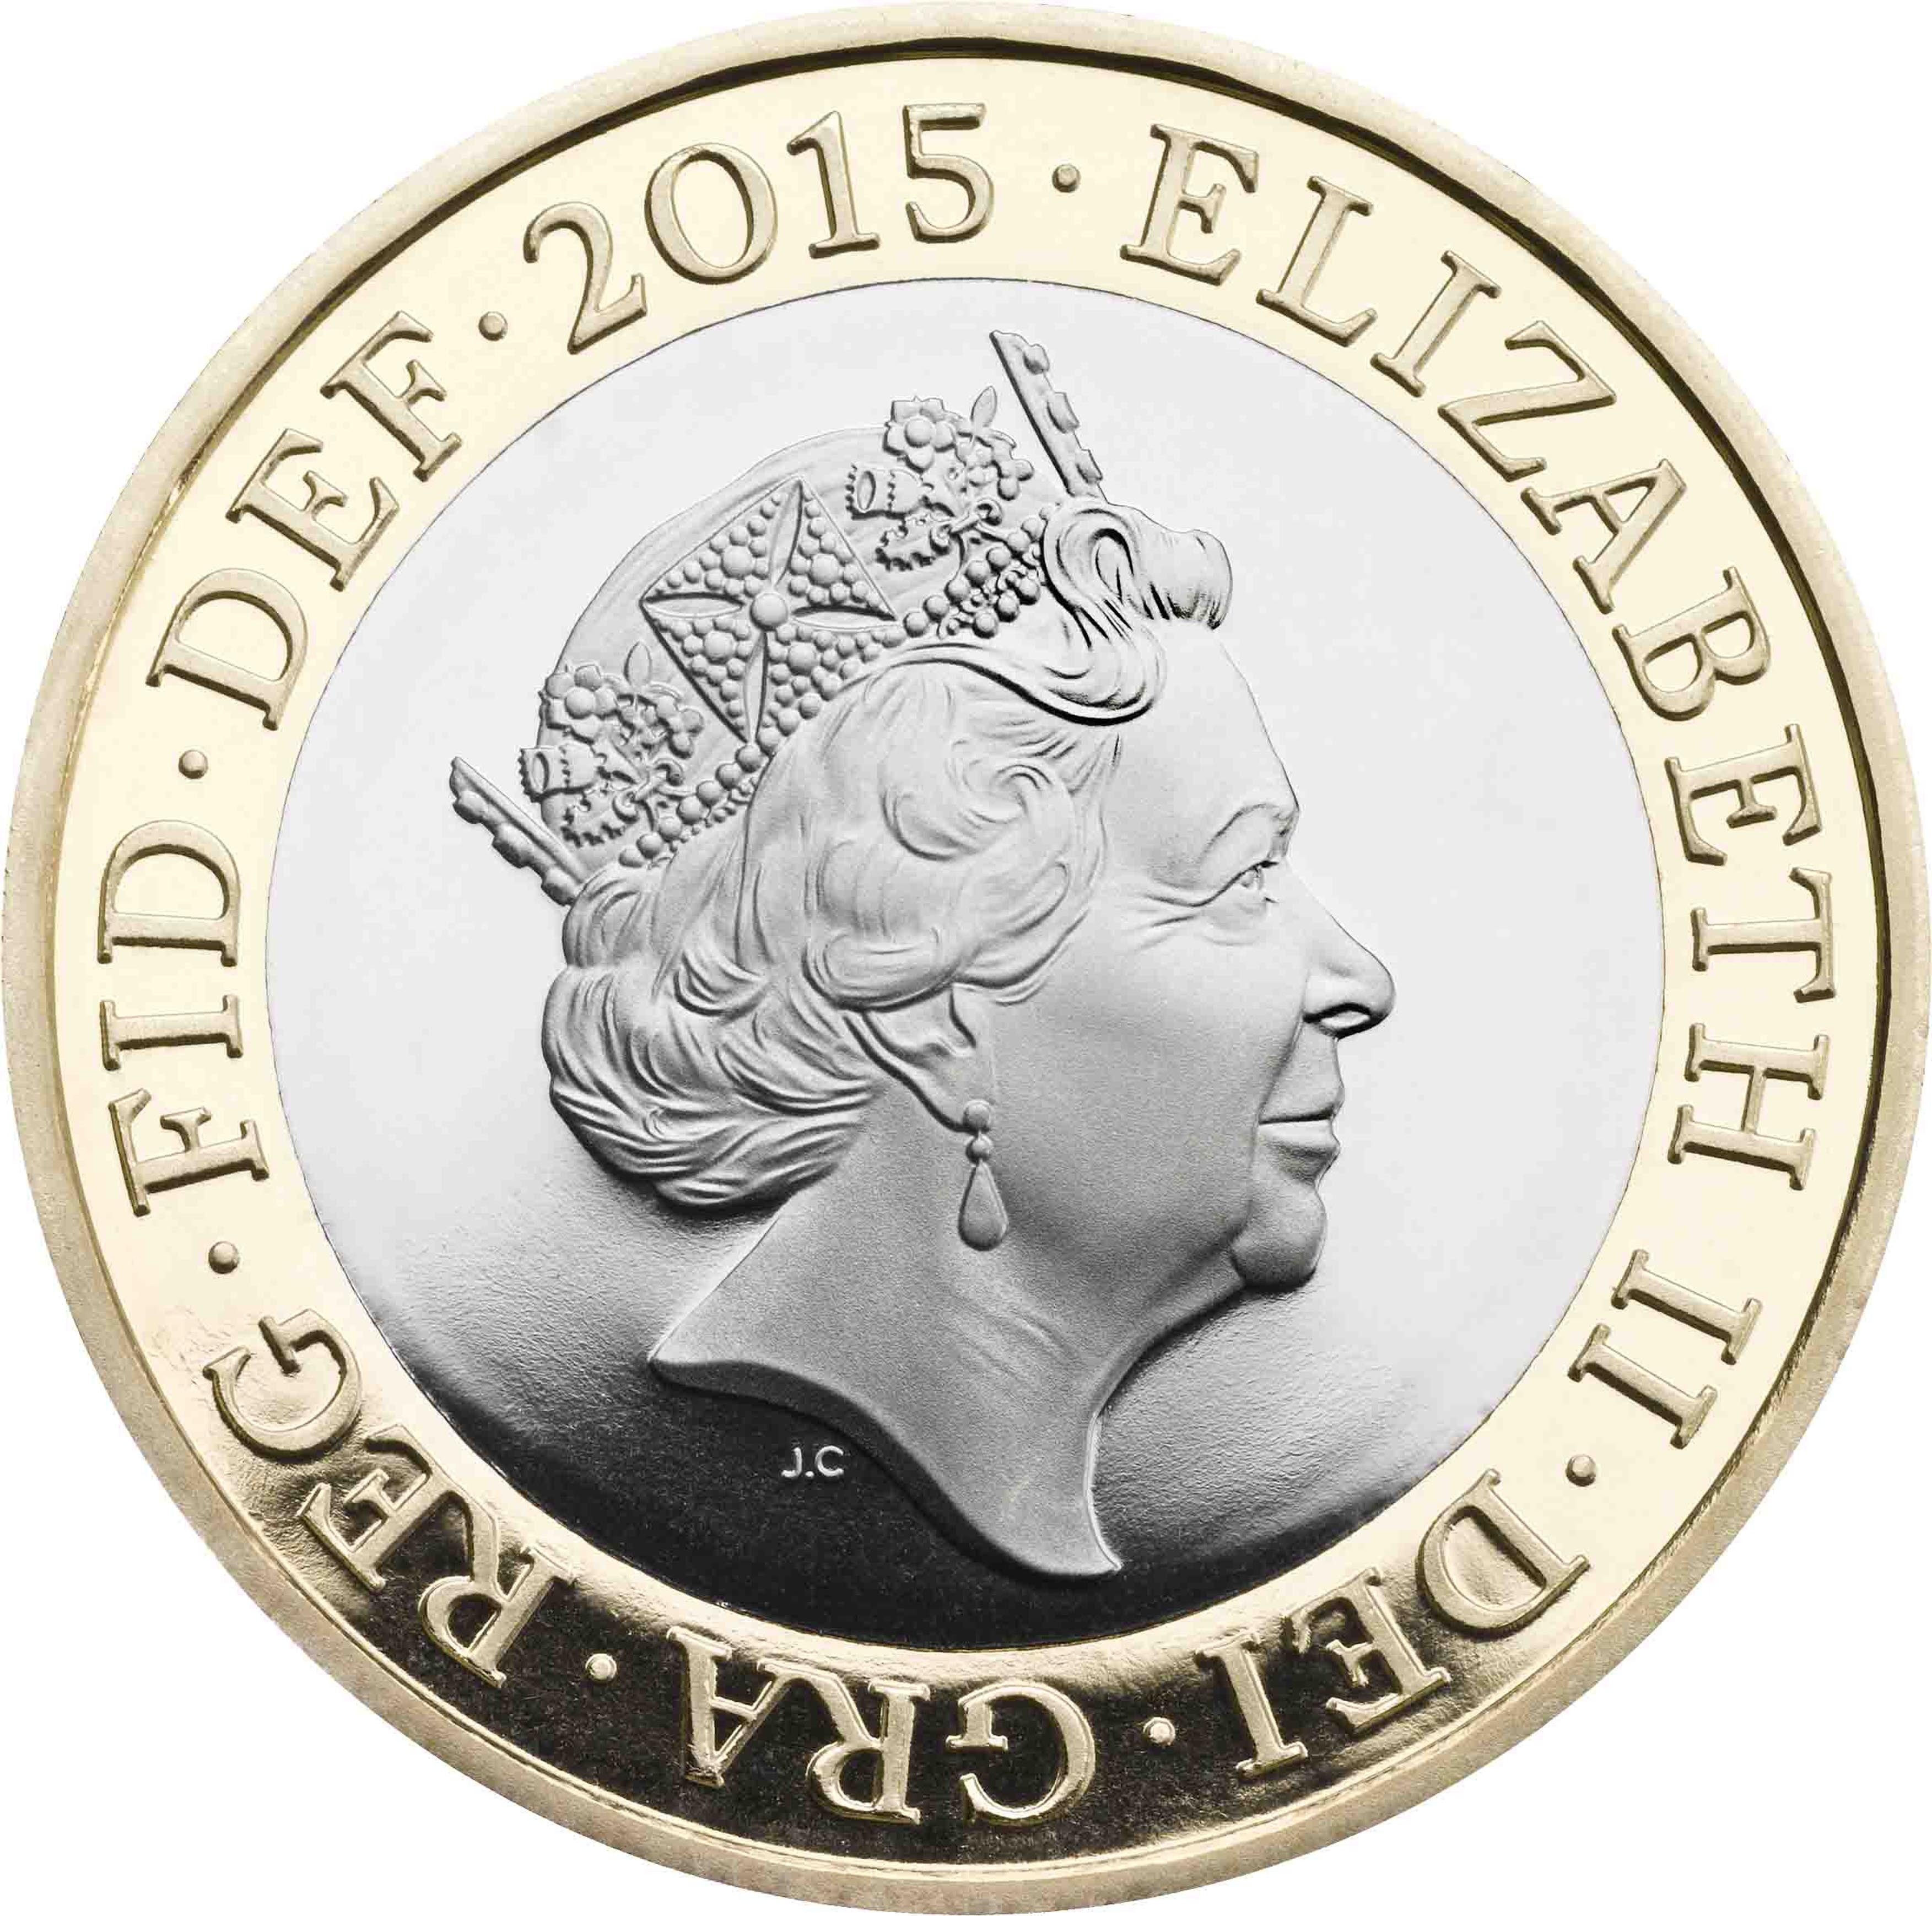 The Queen's New Portrait For UK Coins Revealed